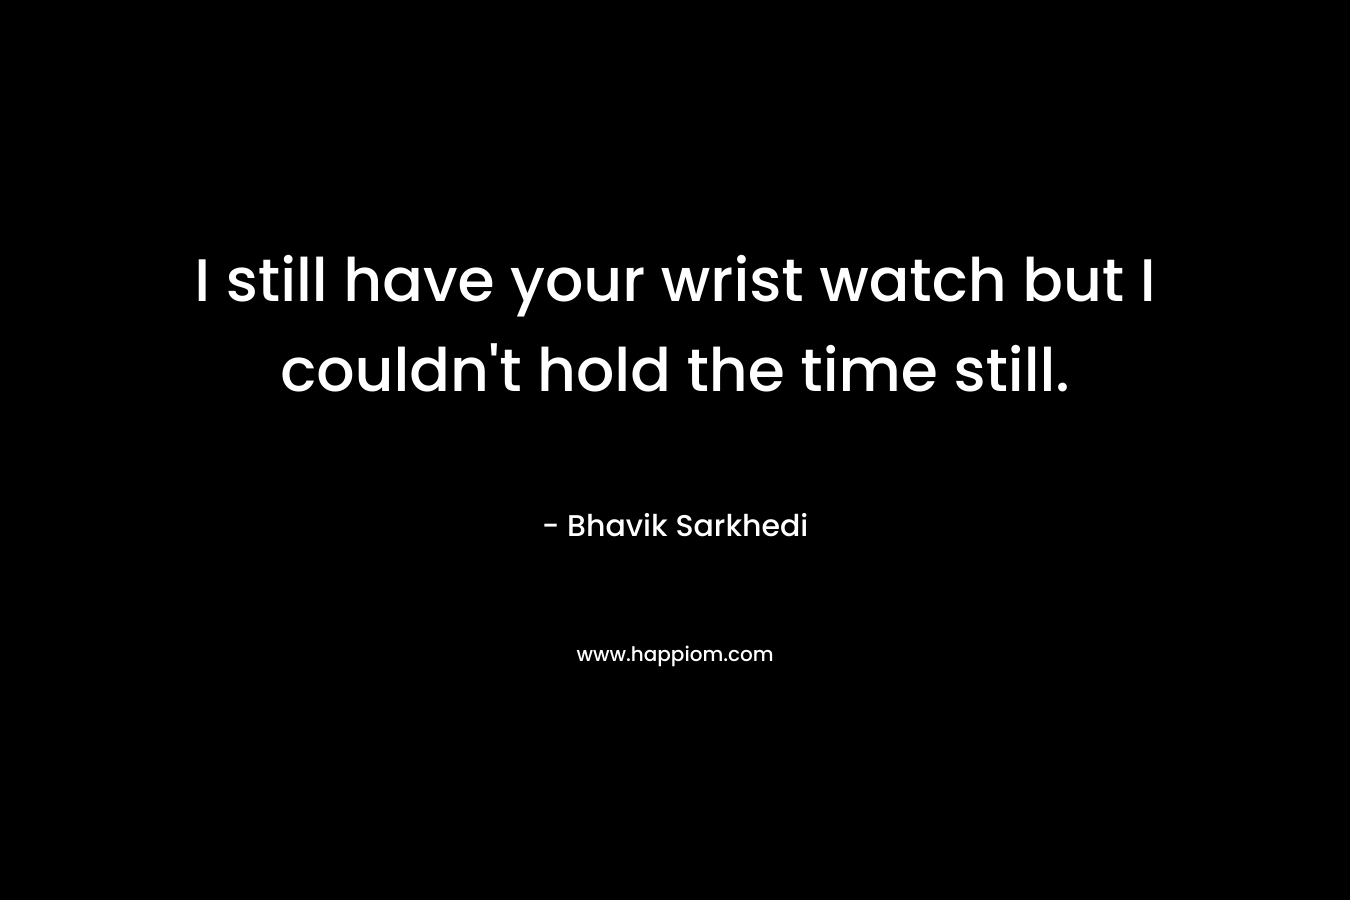 I still have your wrist watch but I couldn't hold the time still.